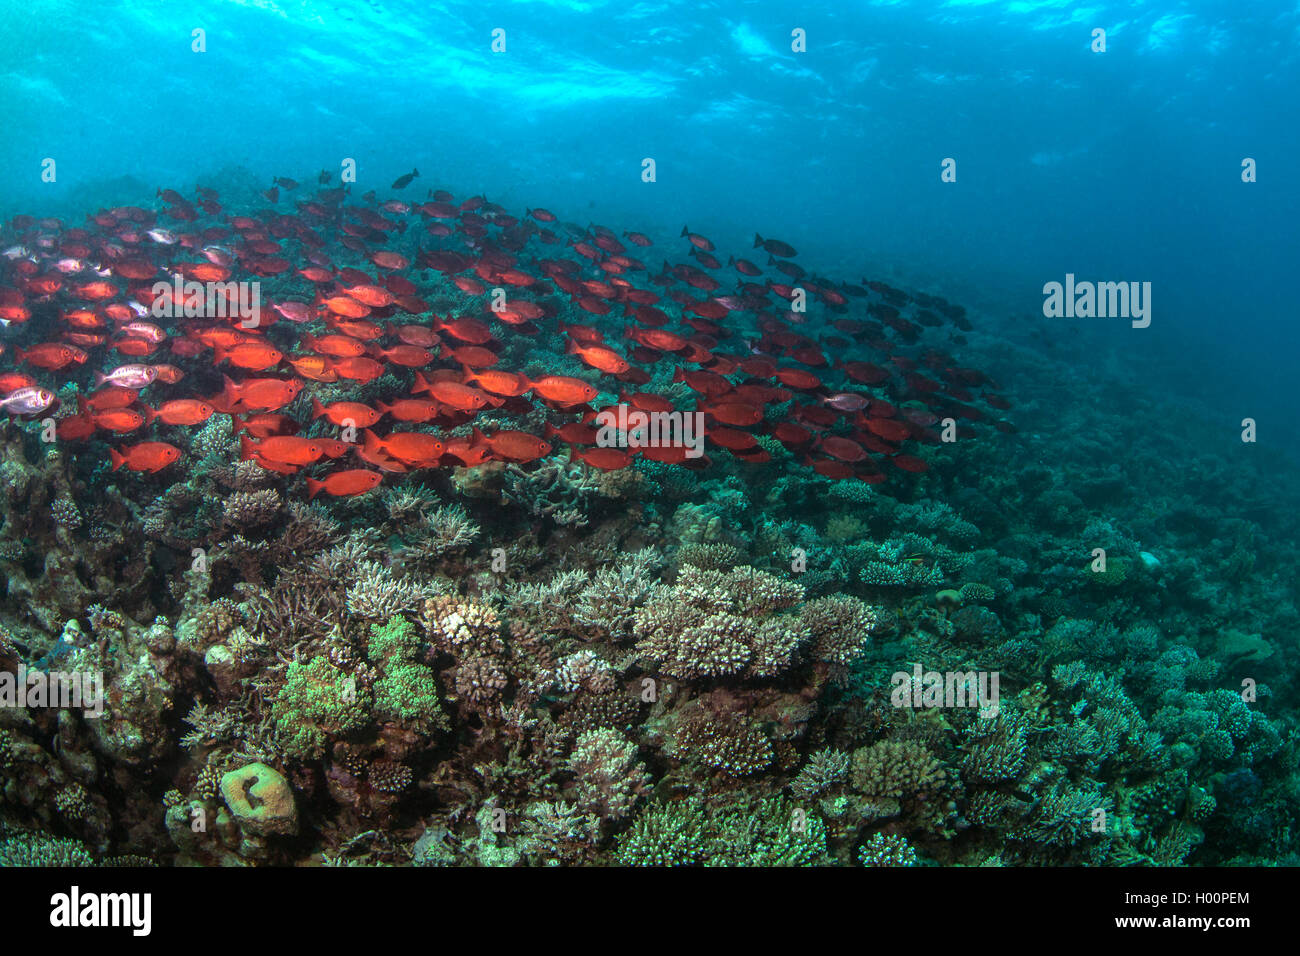 School of big-eyed soldierfish stream across coral reef in the Red Sea, Egypt. Stock Photo